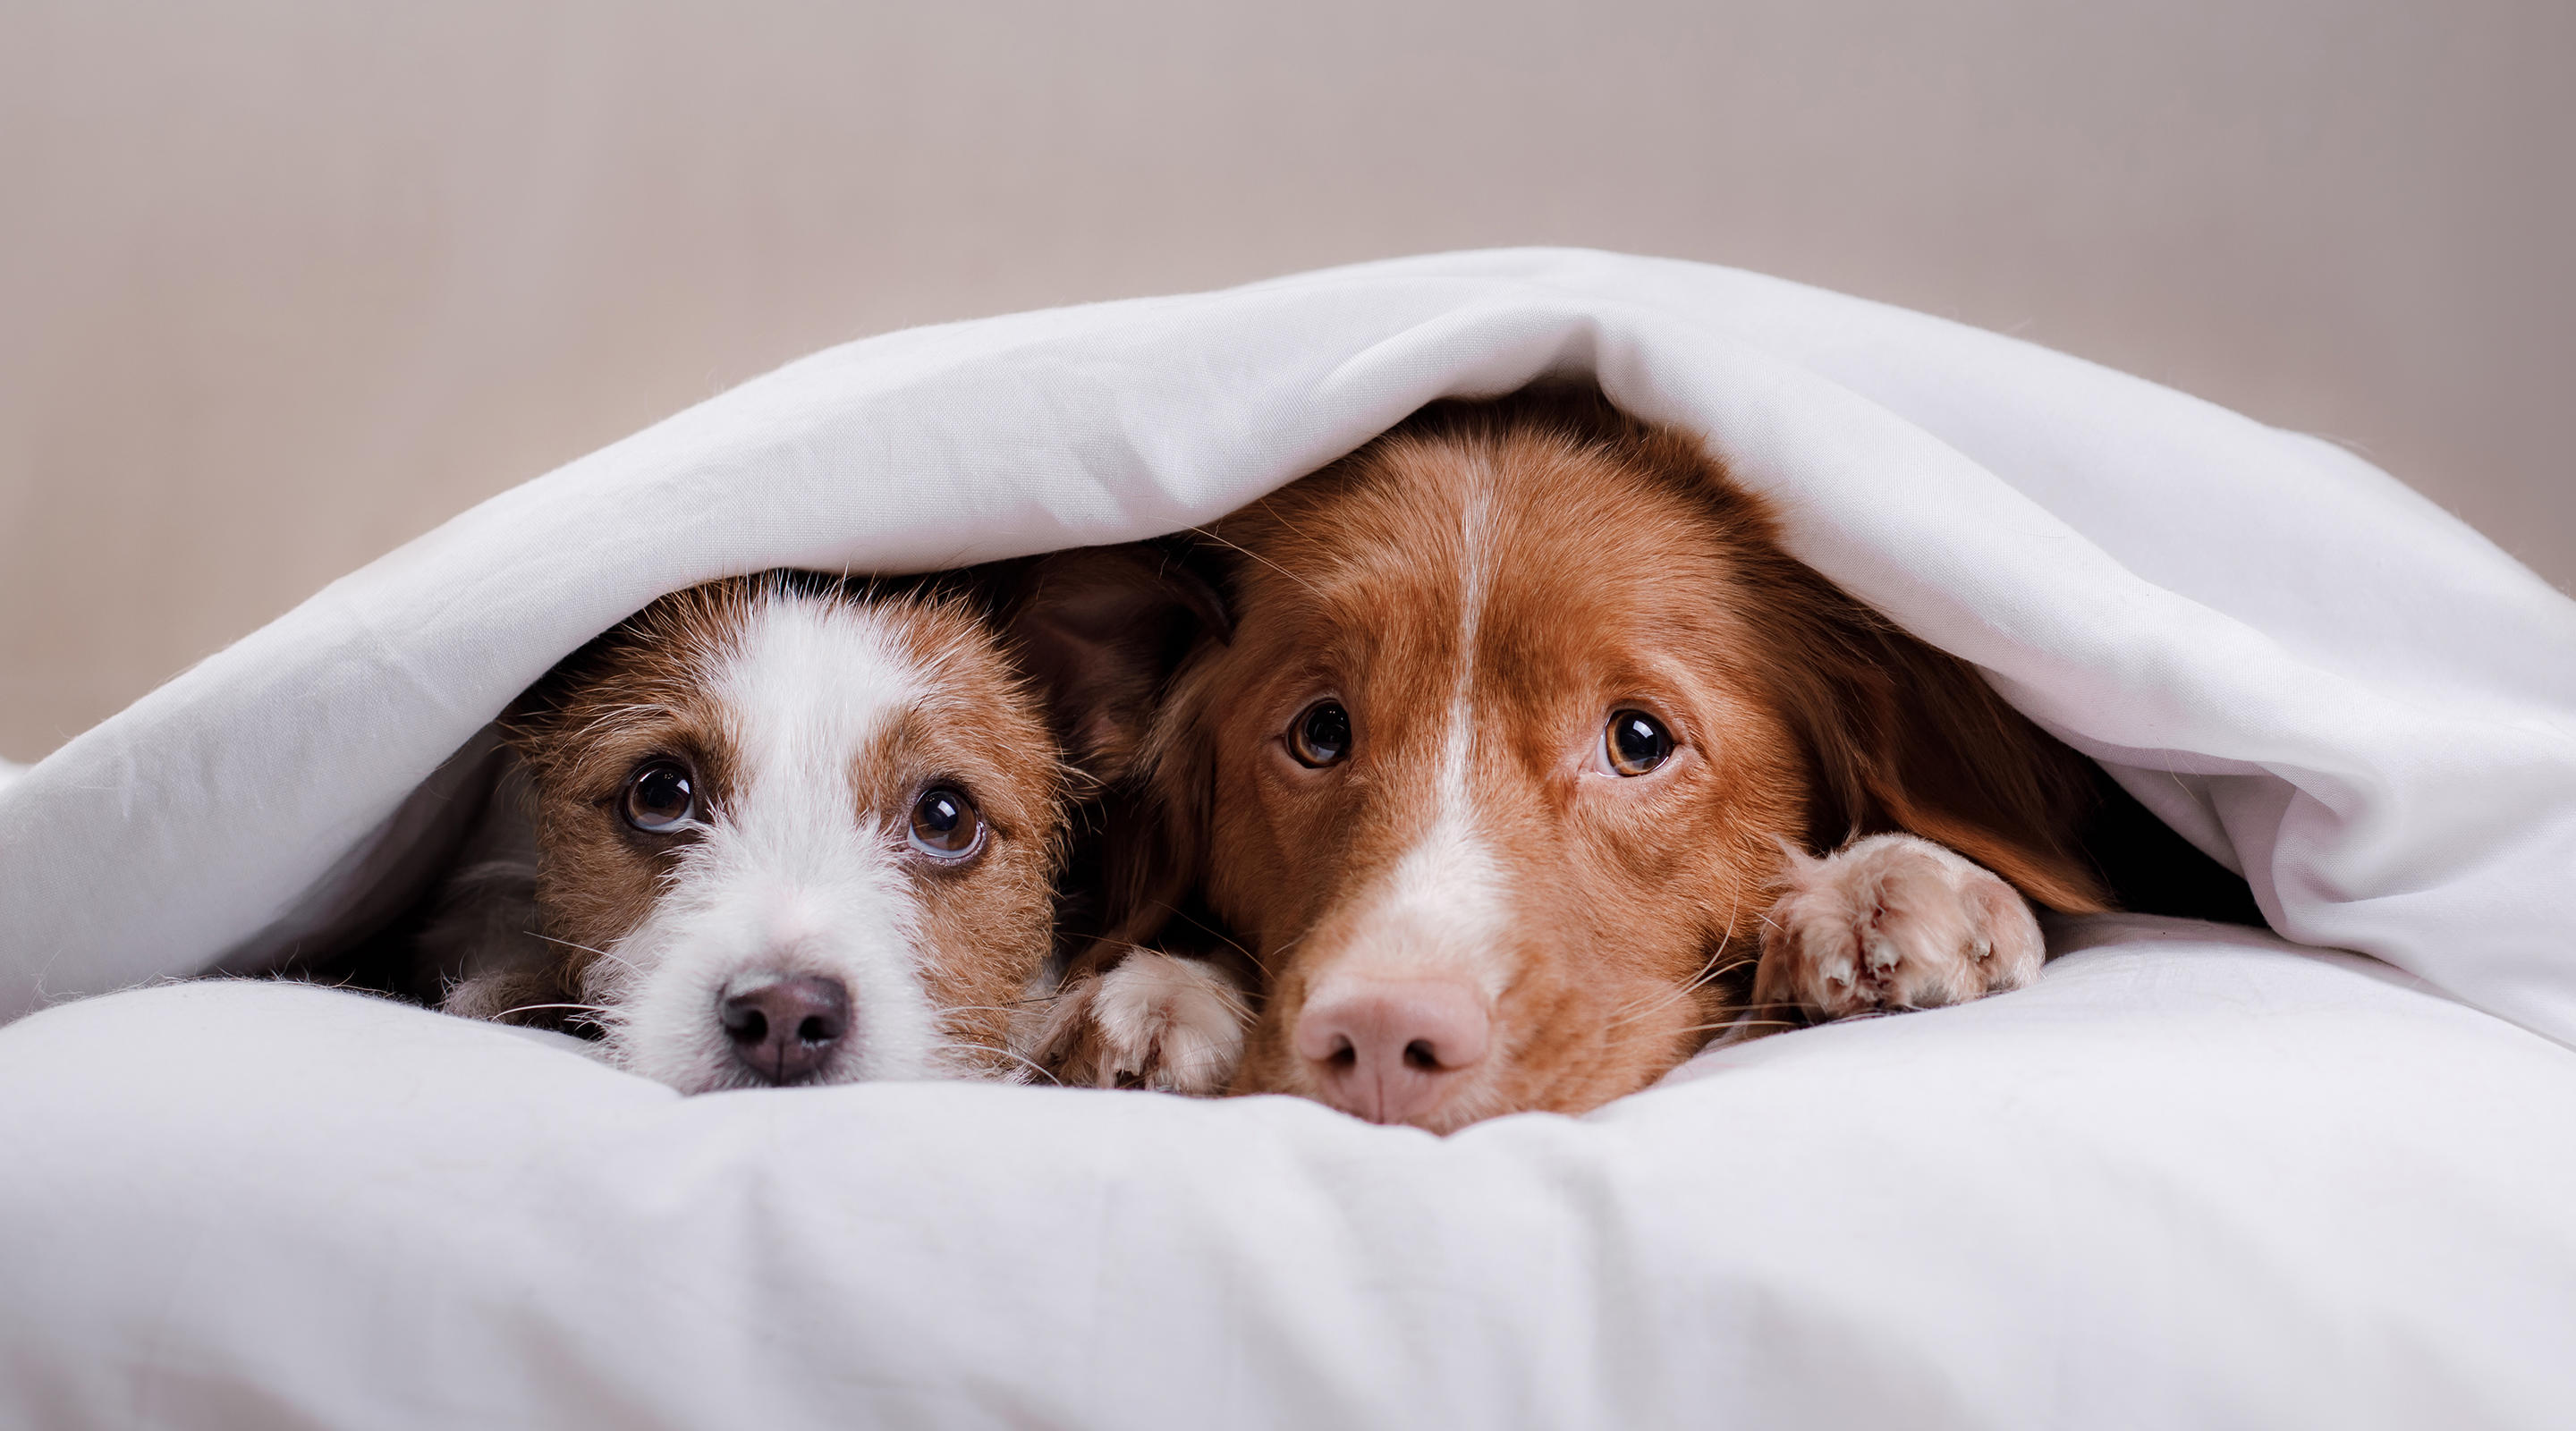 Dog Jack Russell Terrier and Nova Scotia duck tolling Retriever lying on the bed under the covers.